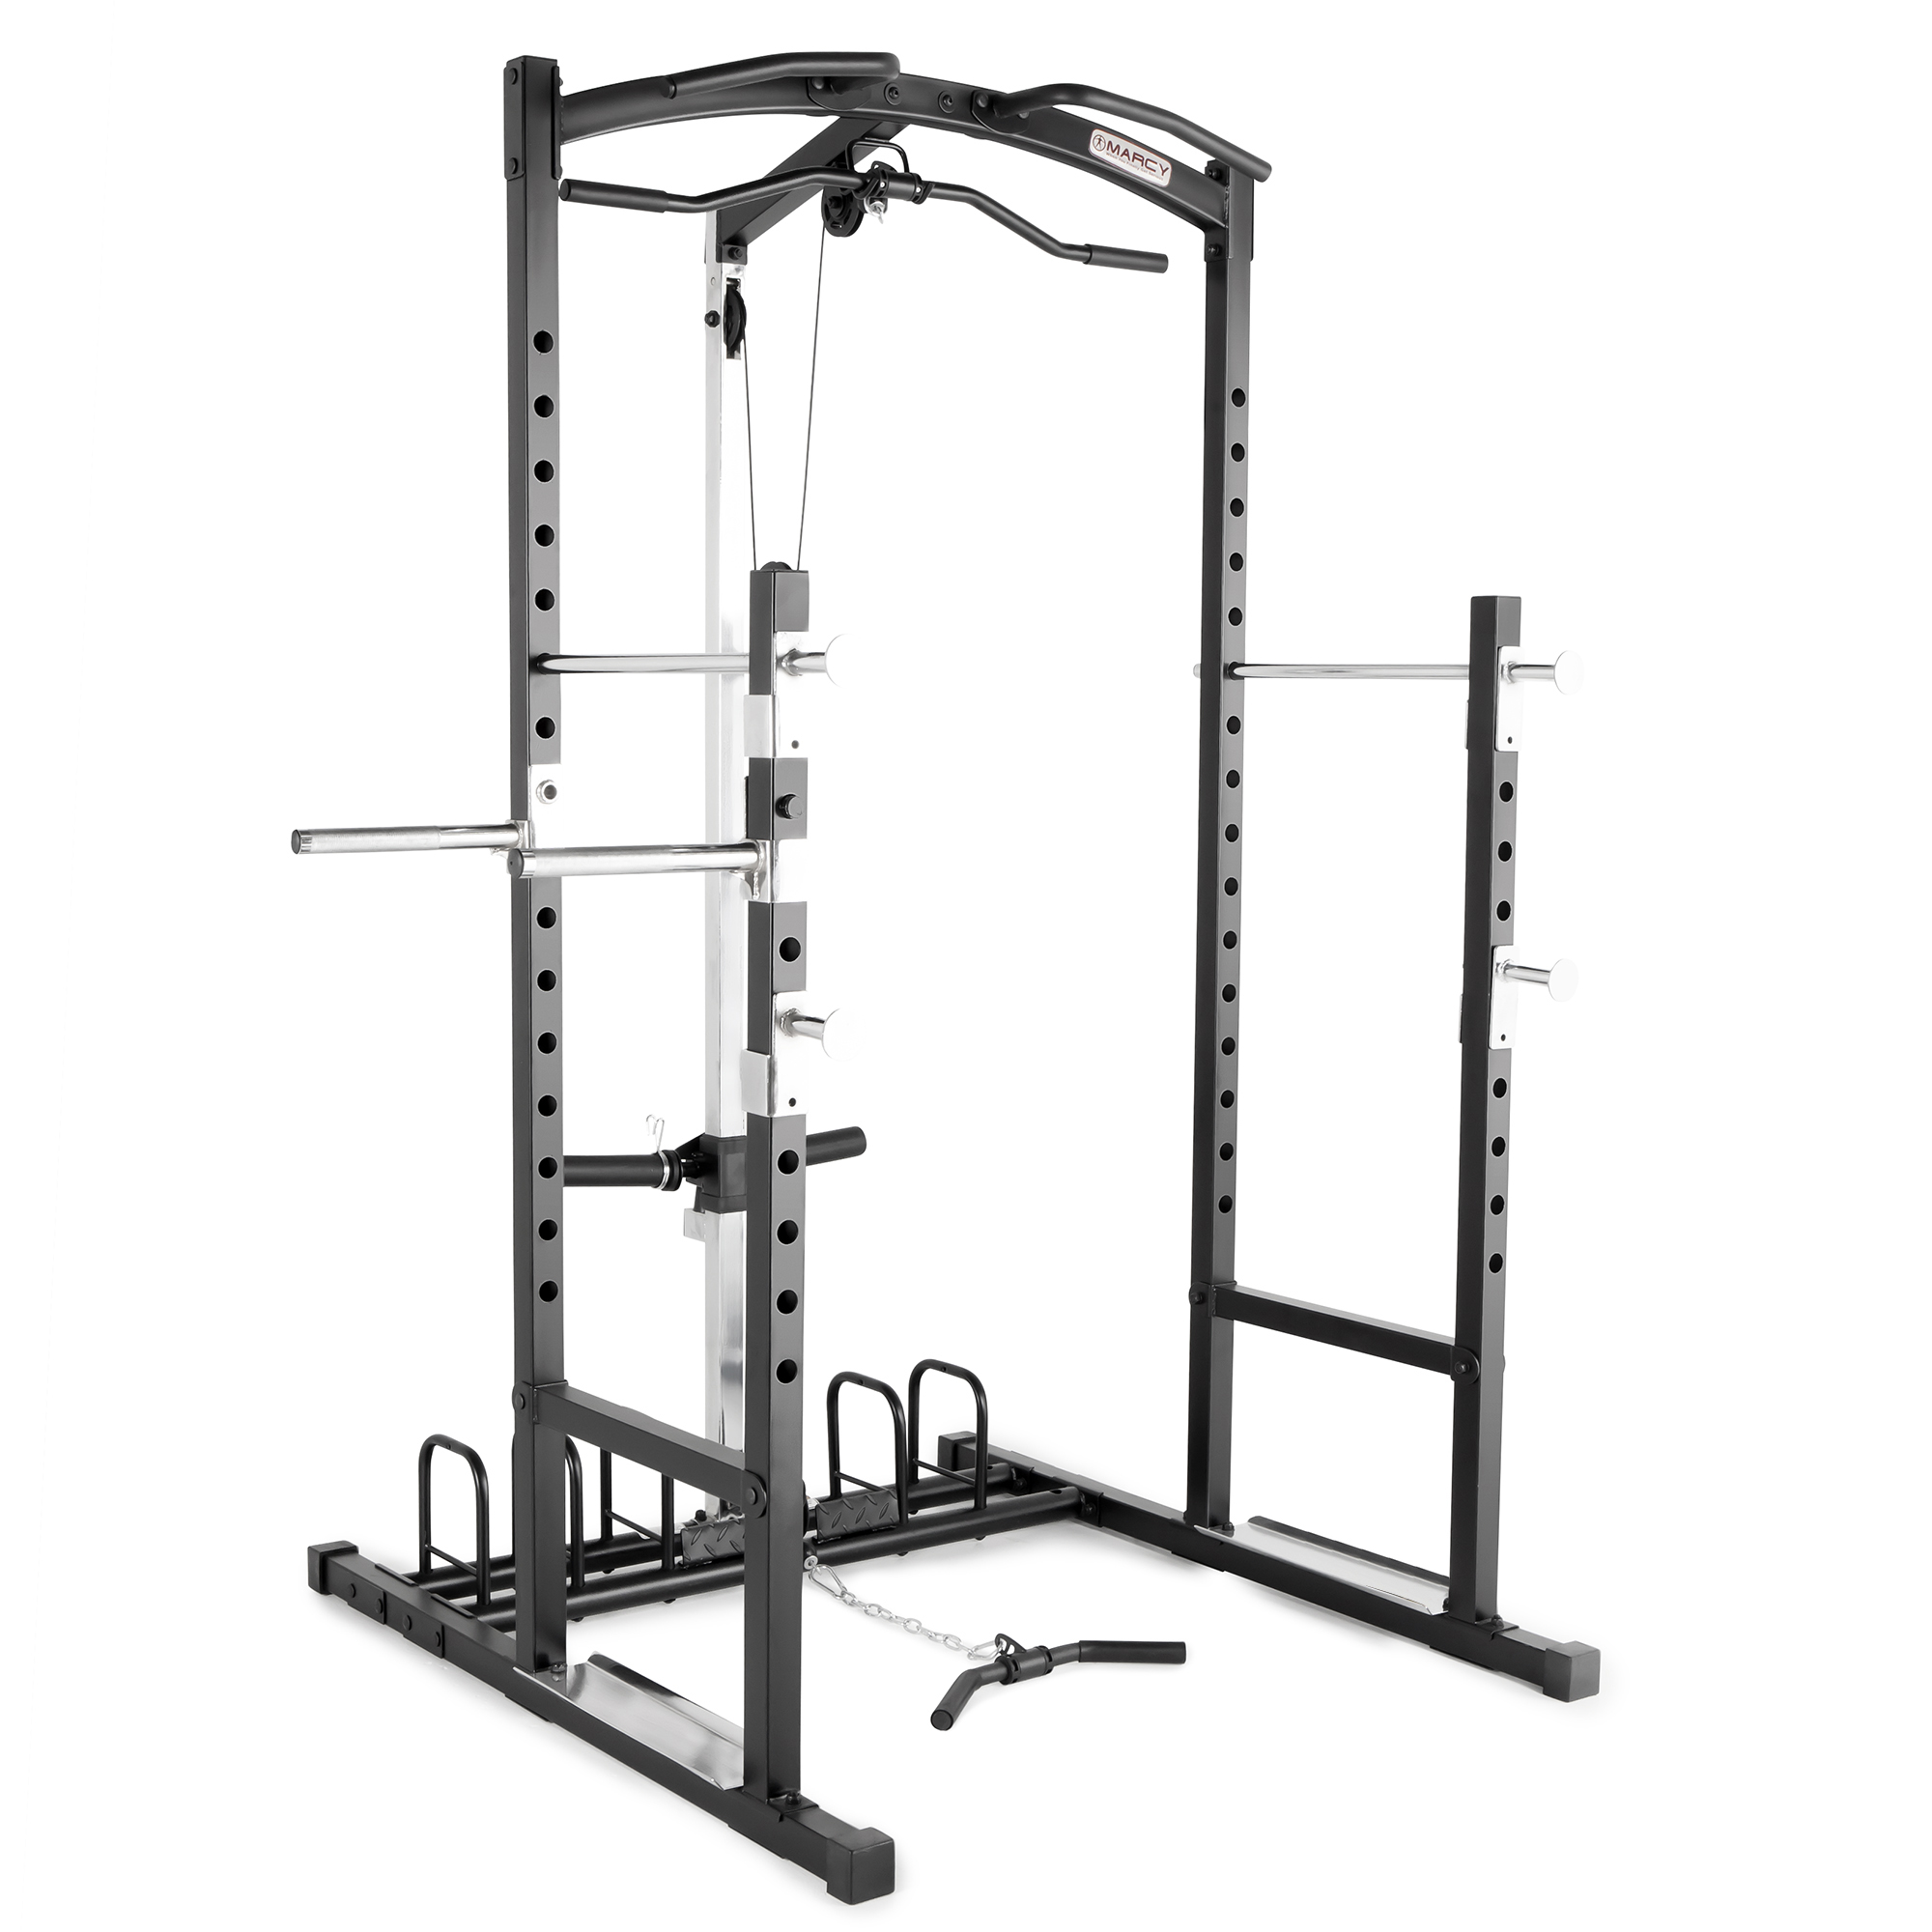 Marcy Home Gym Cage System MWM-7041 - image 1 of 12